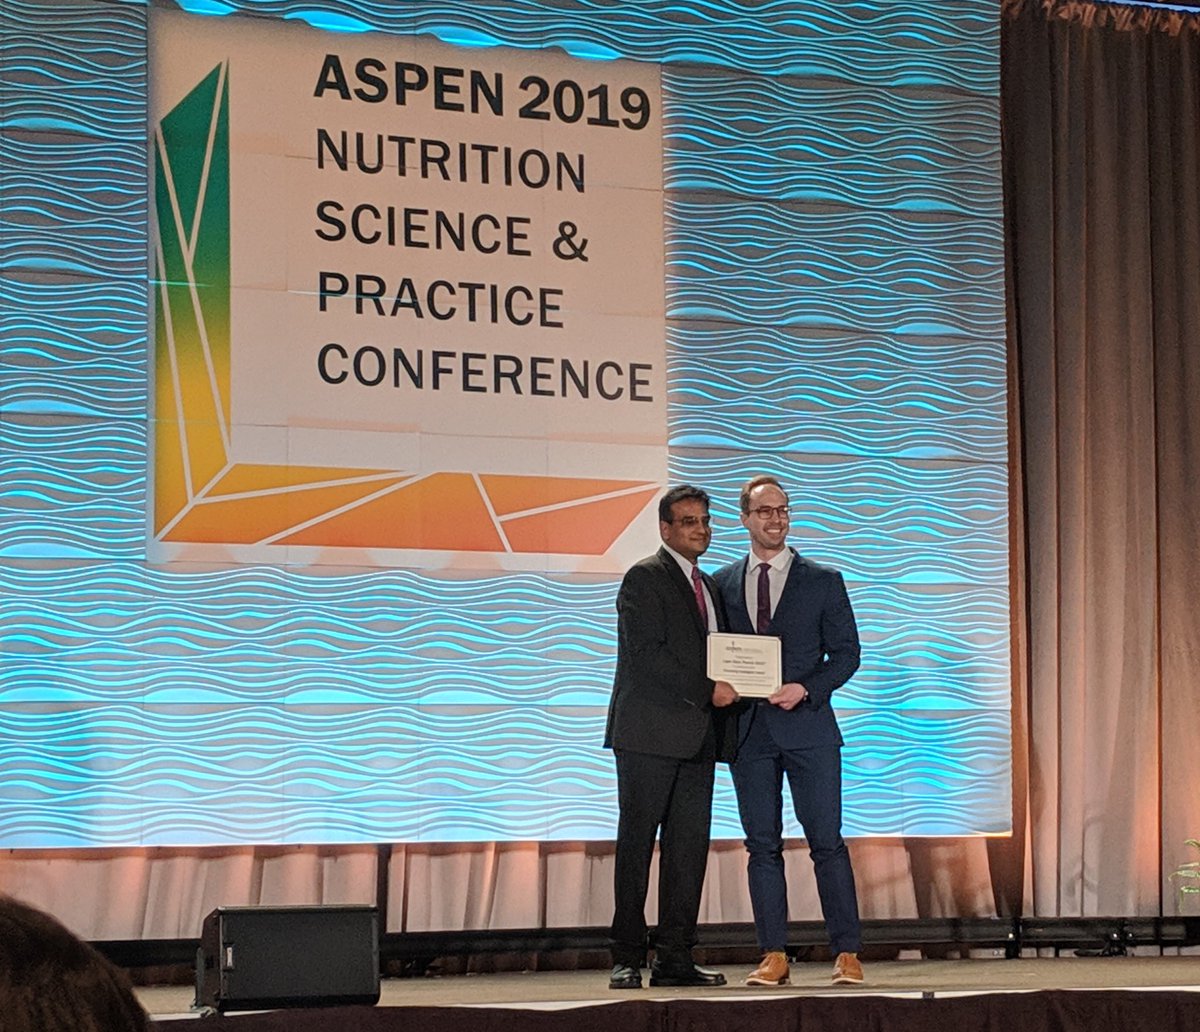 Logan and I thought to study trace element contamination in TPN as a side project during residency and were able to secure funding. He recently presented results at the #ASPEN2019 conference and won the Promising New Investigator award! #parenteralnutrition #nutritionpharm #BCNSP